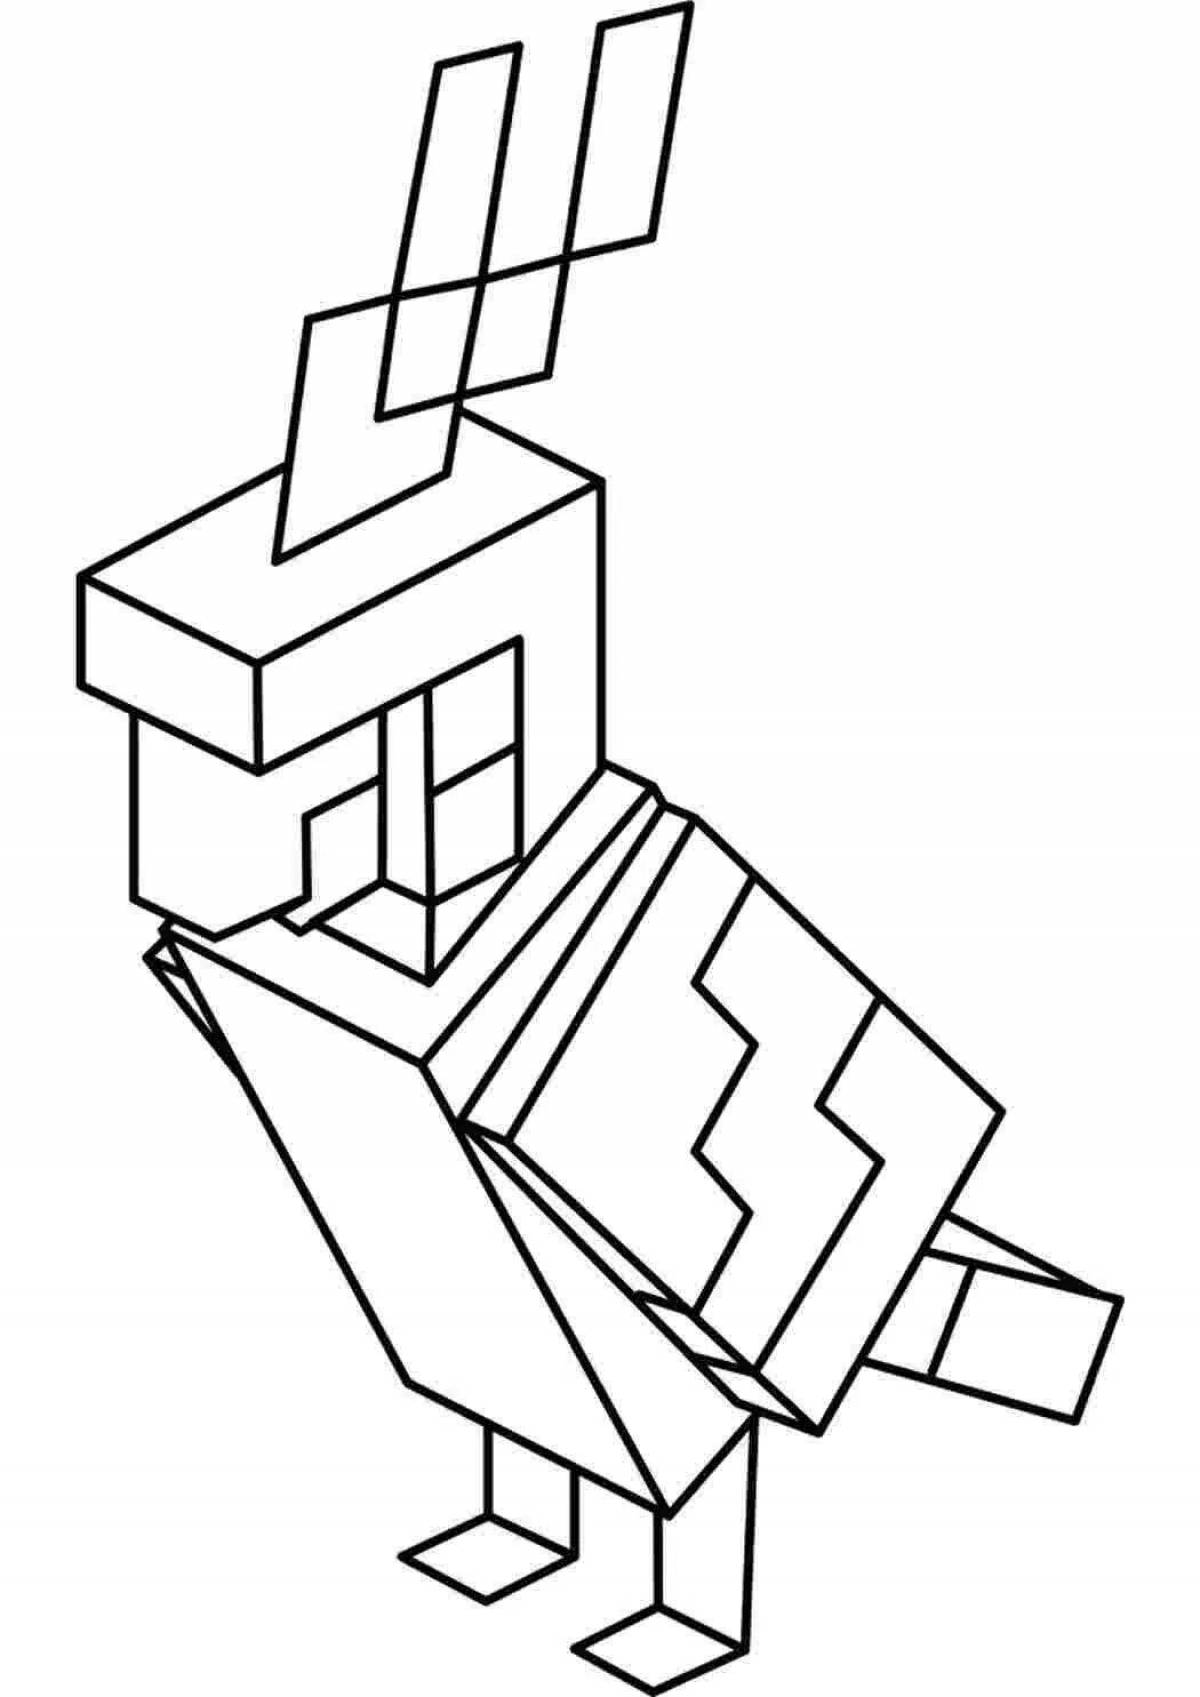 Colorful minecraft bunny coloring page